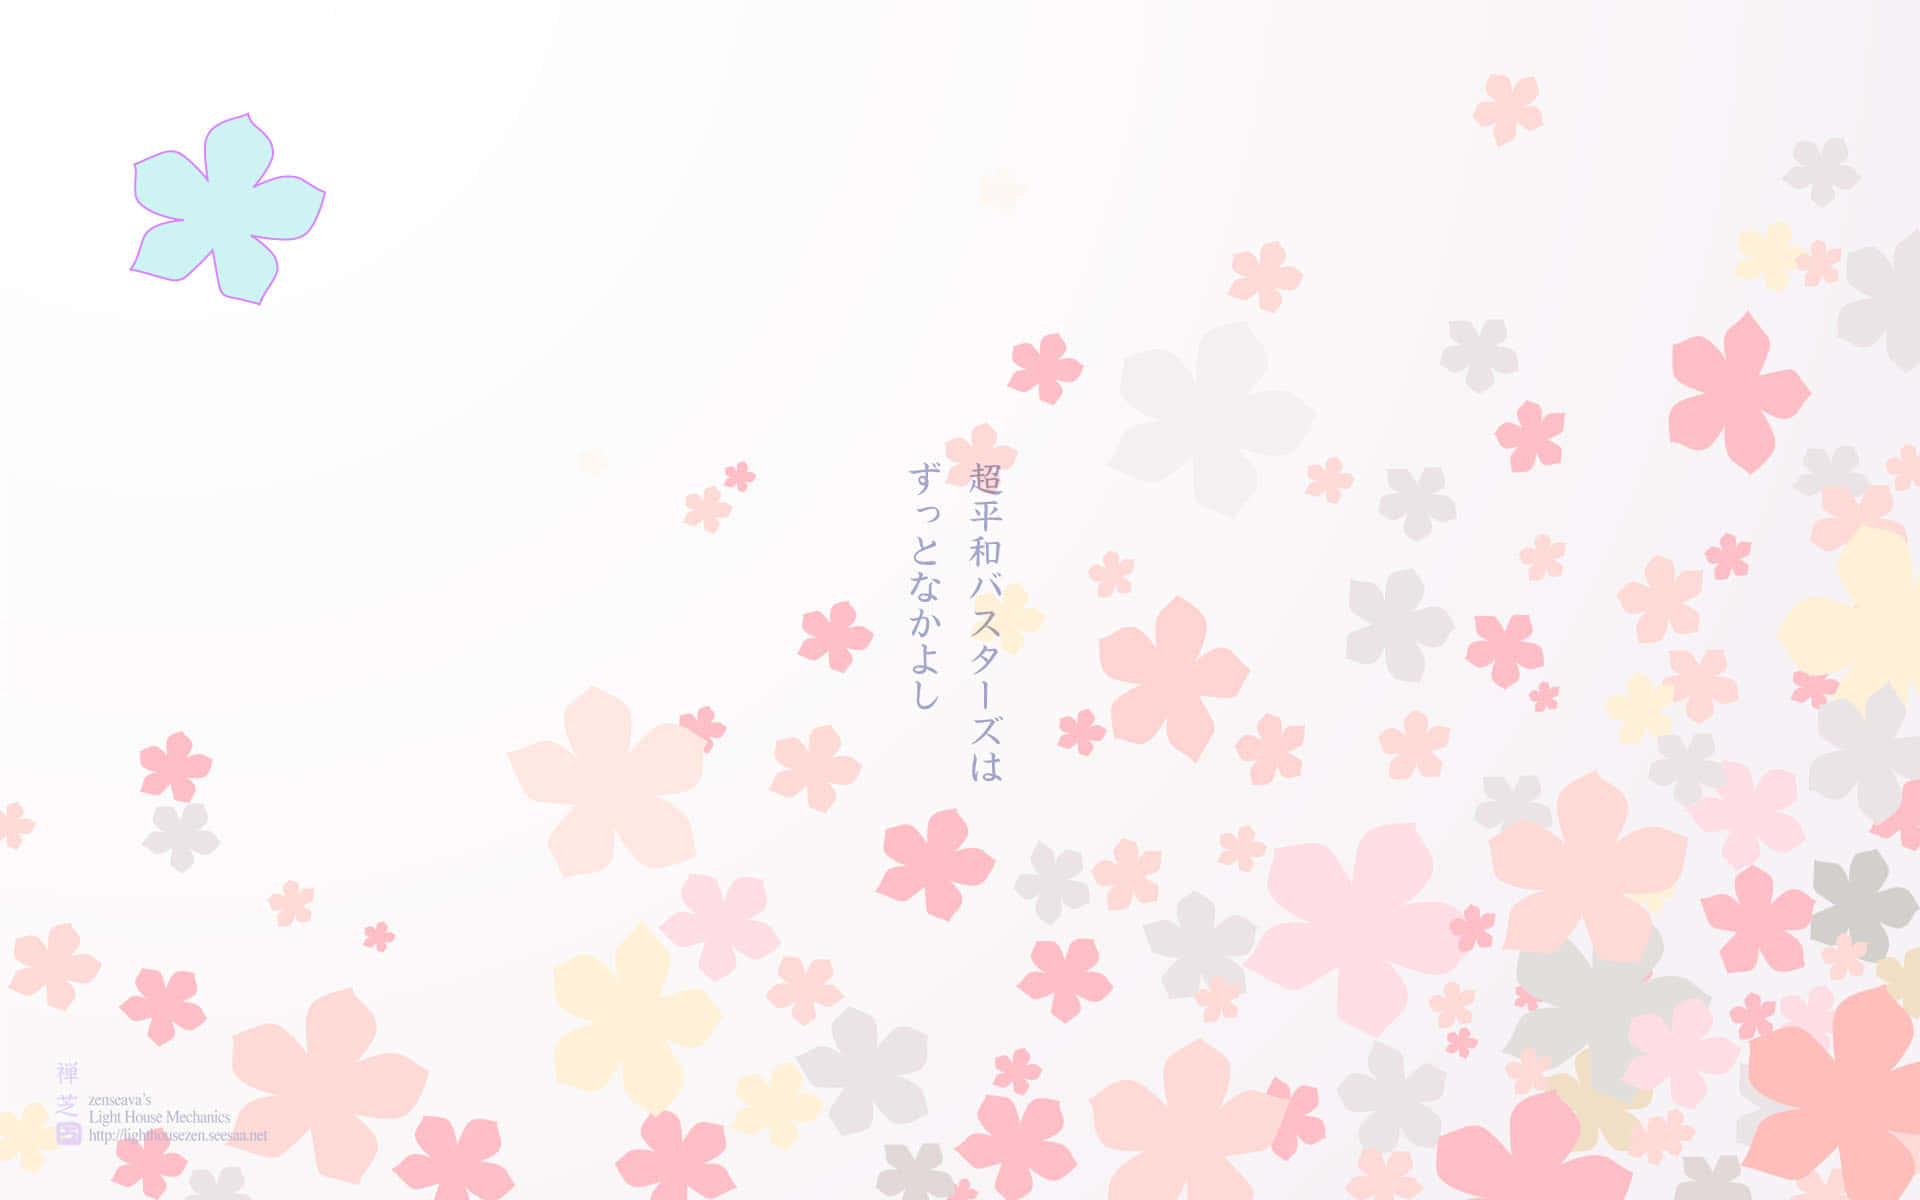 The Swallowtail Flower of Anohana - A Symbol of Friendship